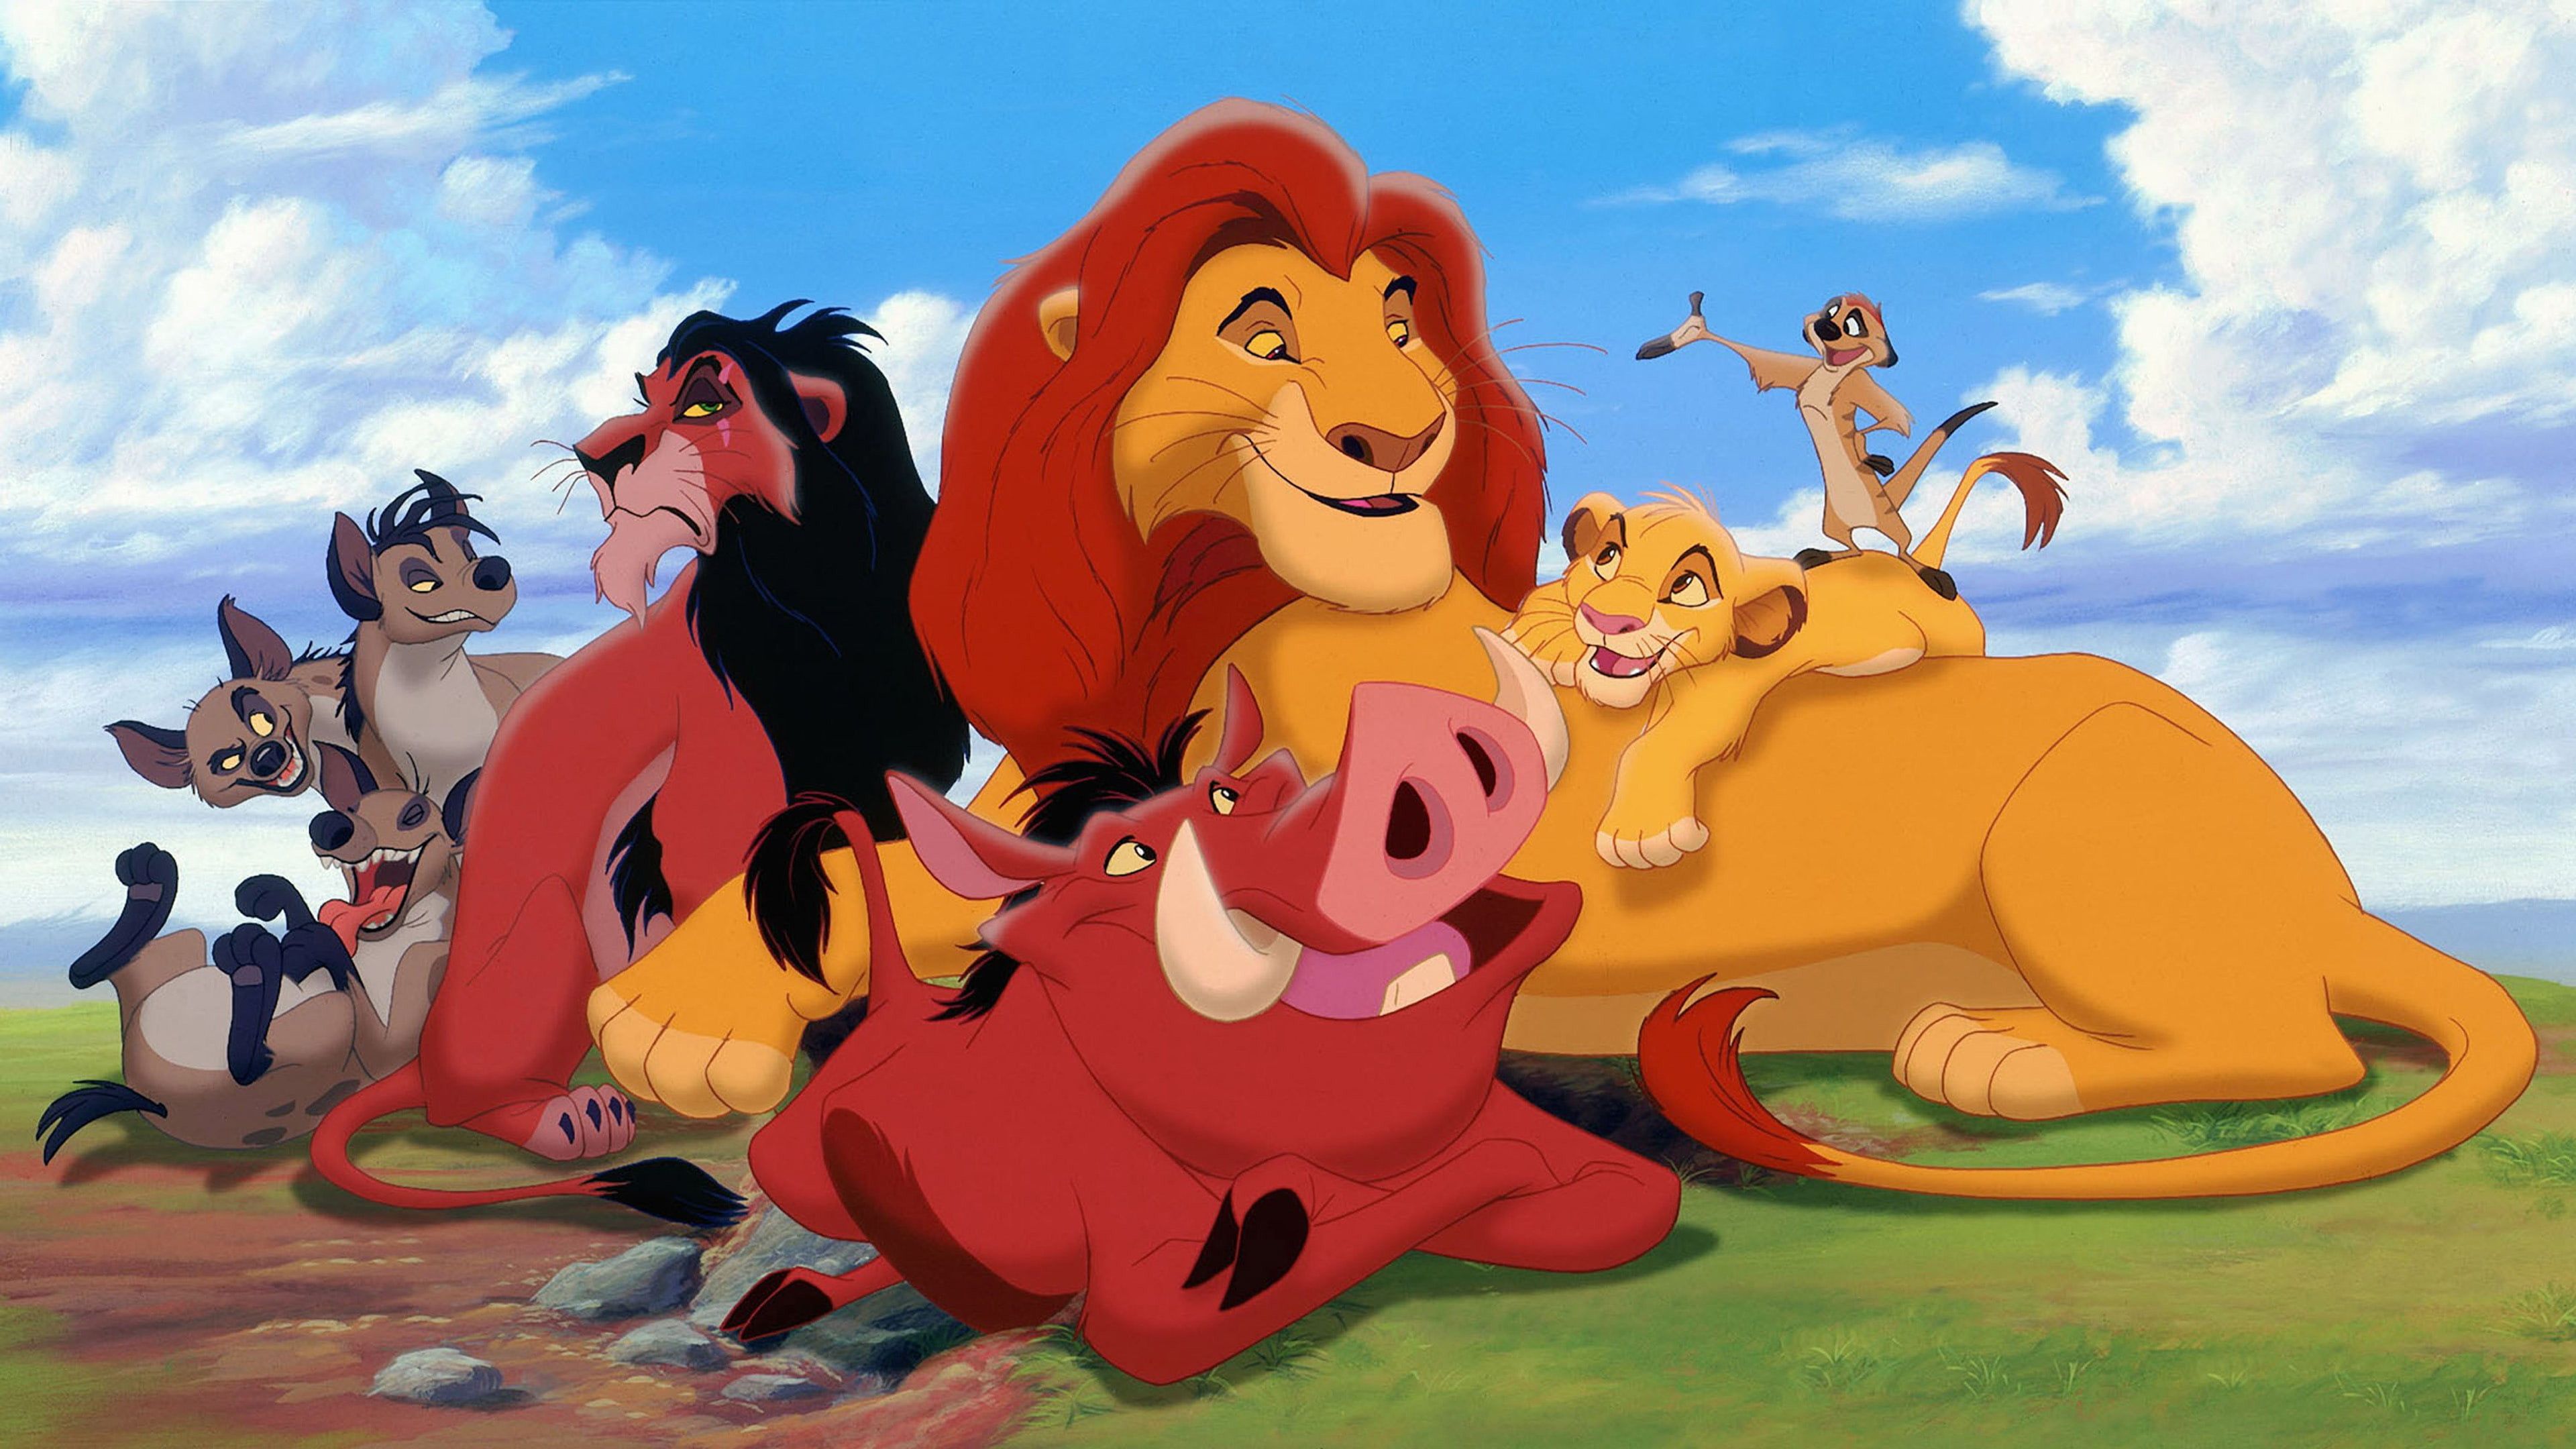 A group of lions and other animals - The Lion King